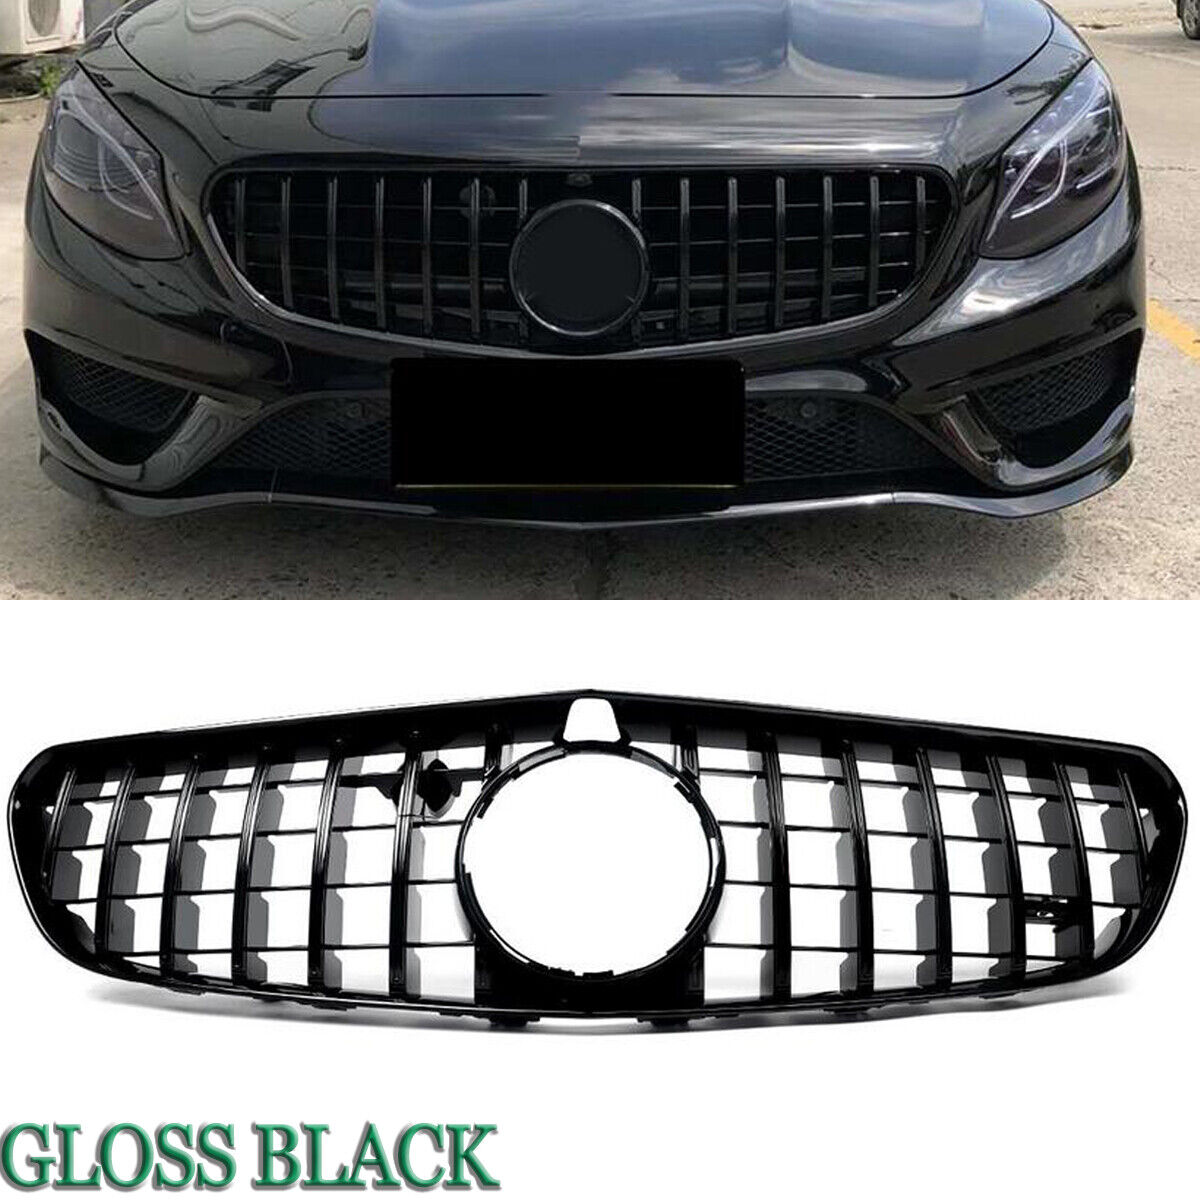 GT R Front Grille For Mercedes-Benz C217 W217 AMG S63 Coupe 14-17 Glossy Black